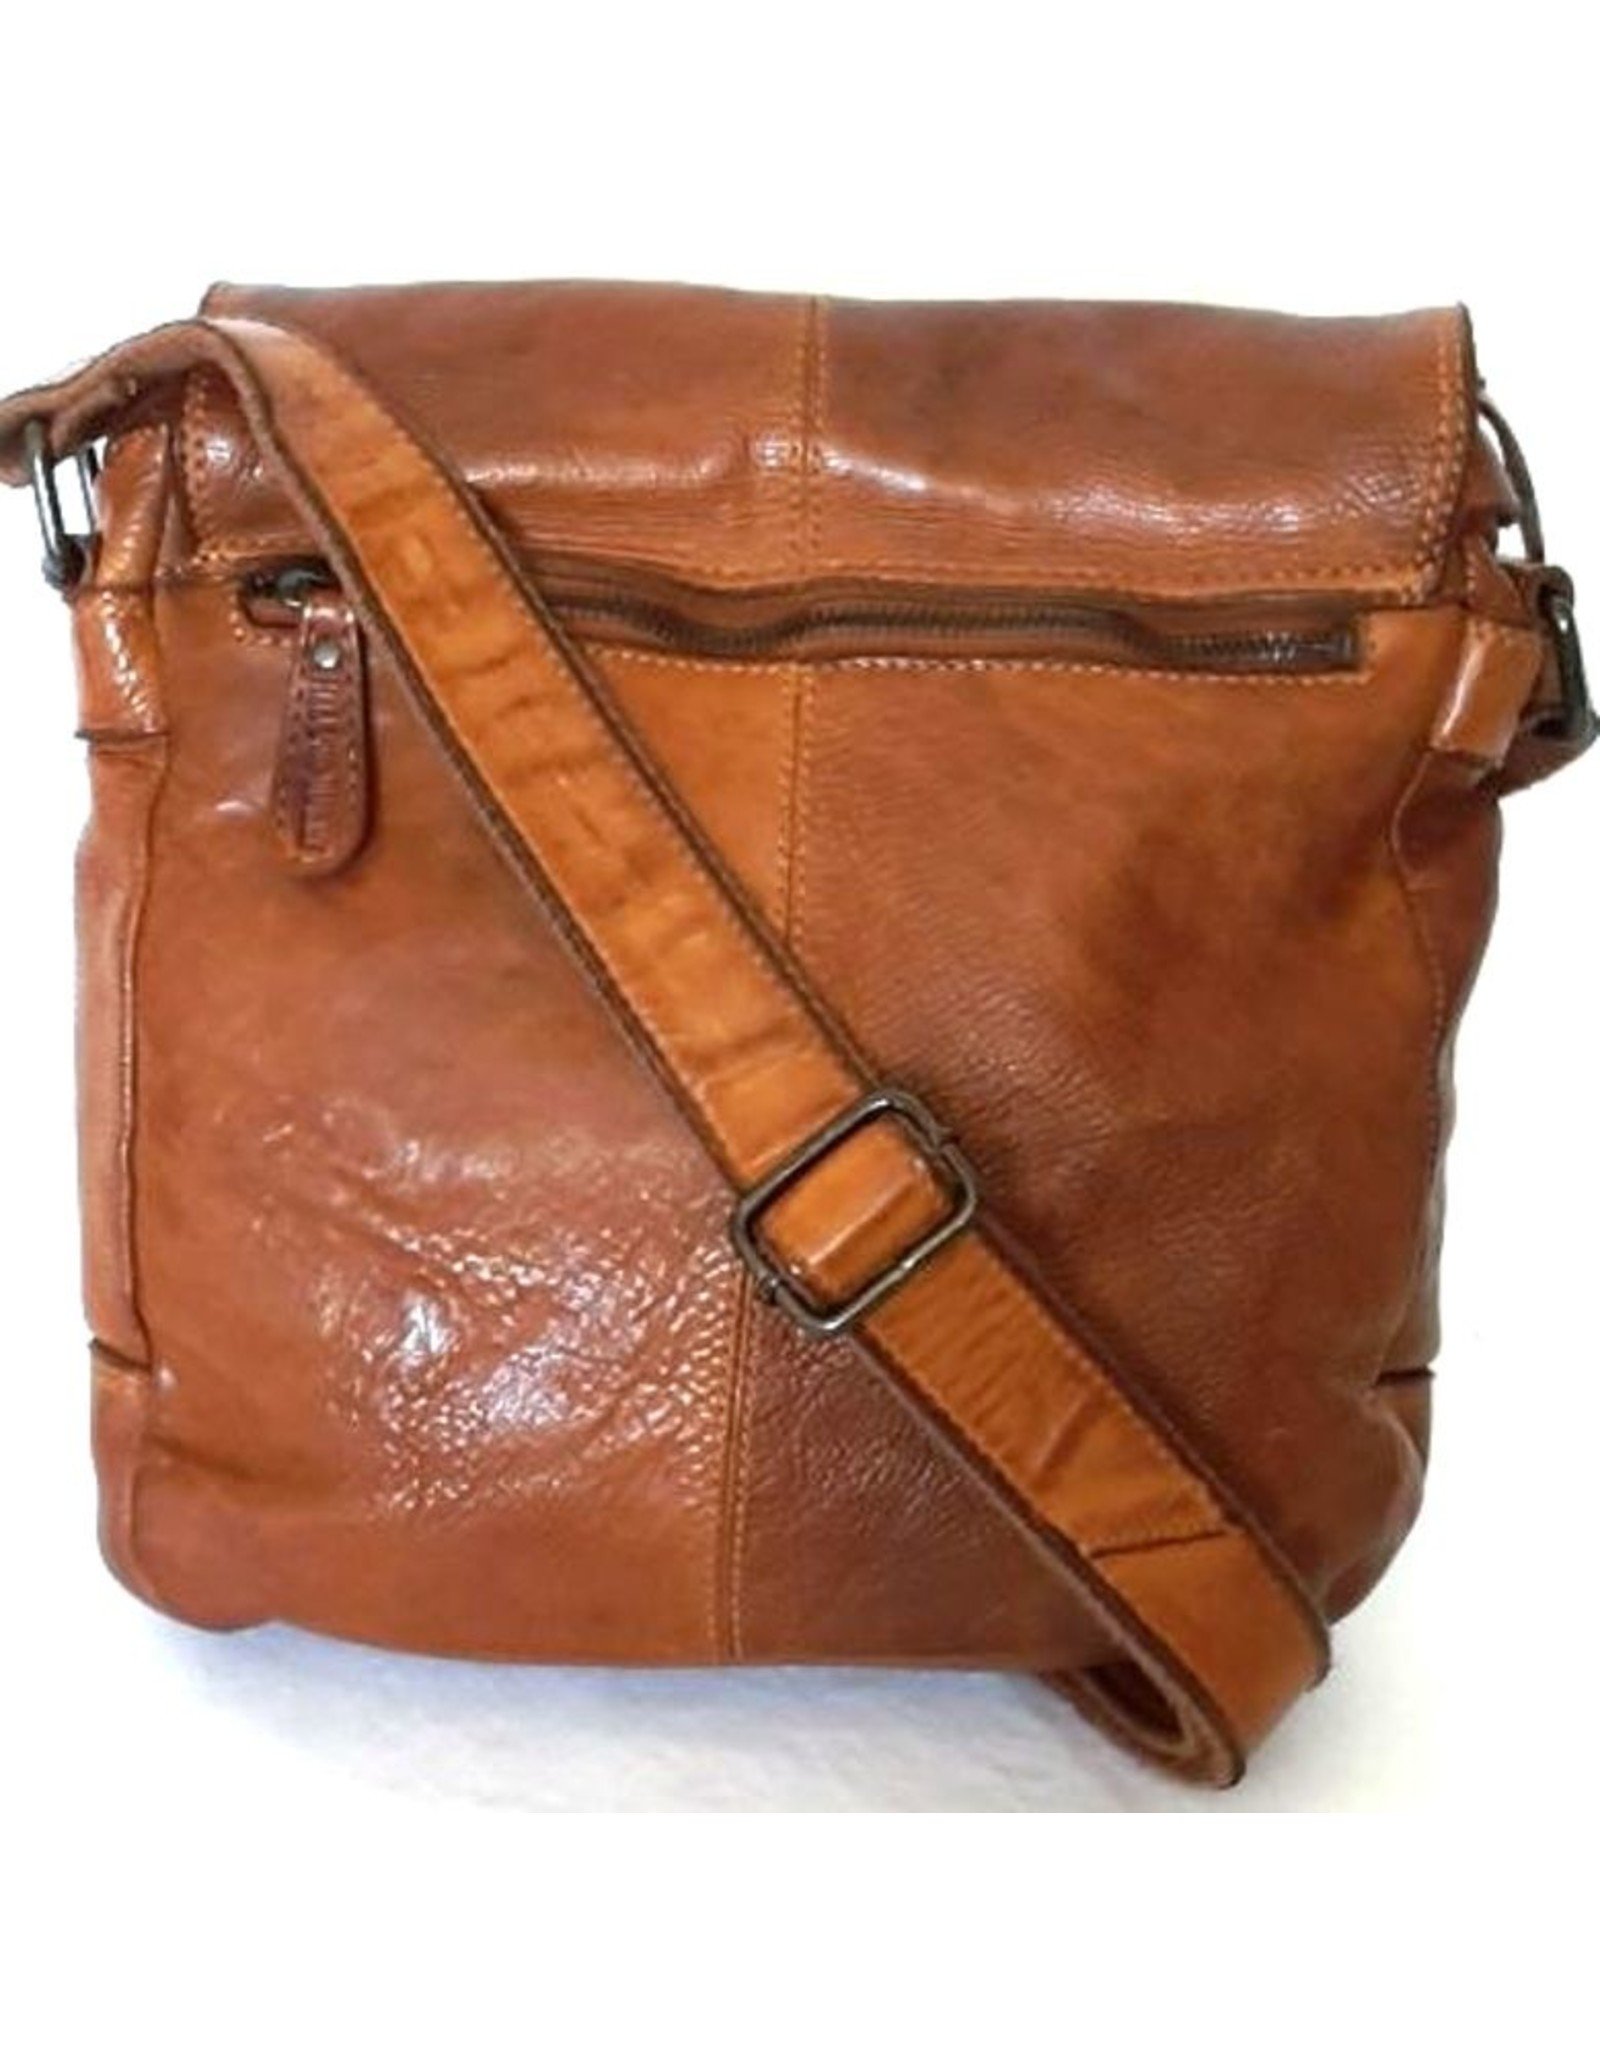 HillBurry Leather Shoulder bags Leather crossbody bags - HillBurry crossbody bag (washed leather)